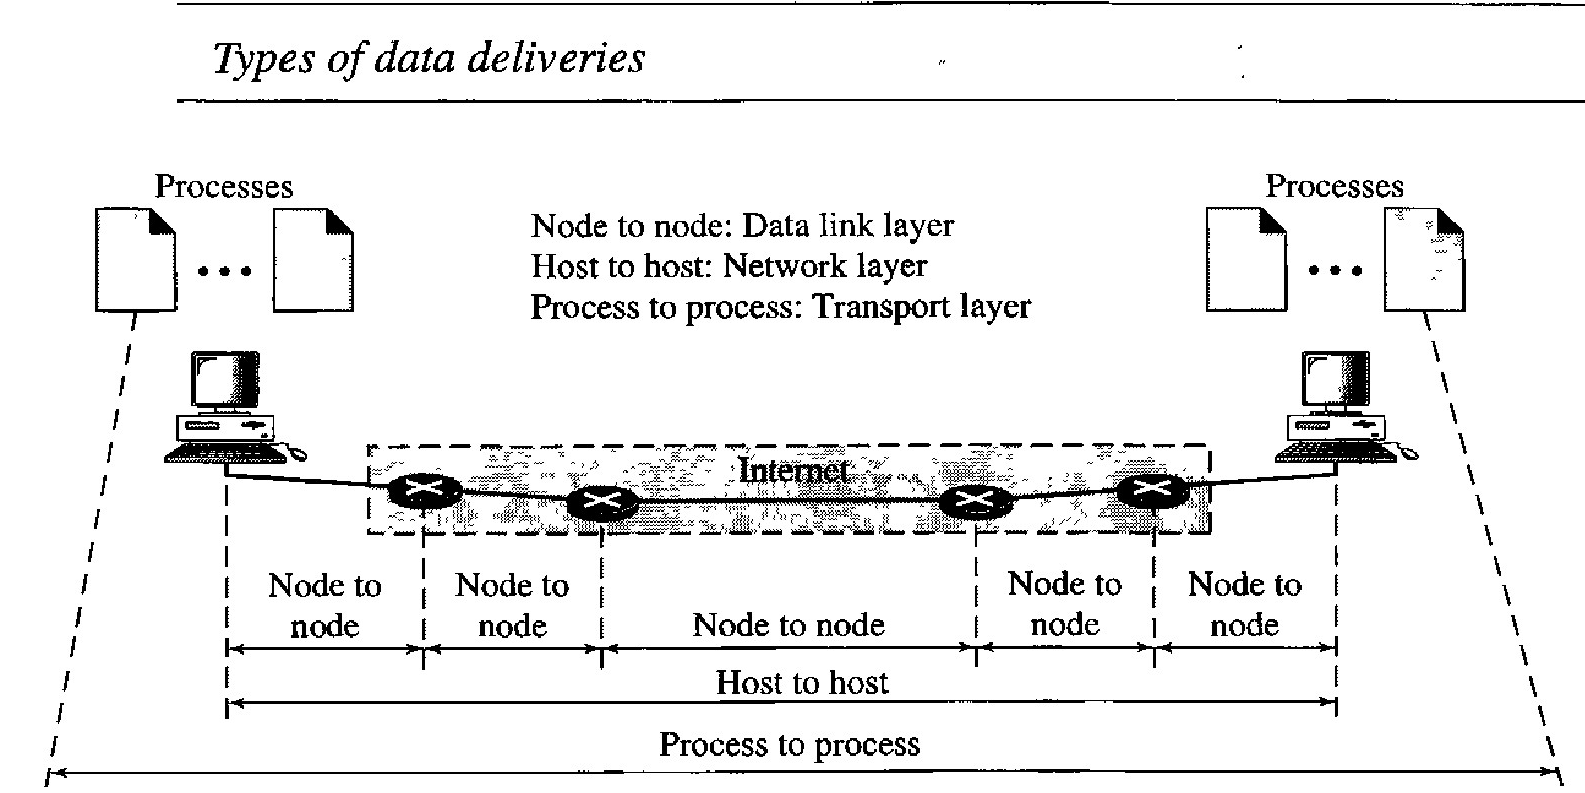 Process-to-Process Delivery: UDP, TCP